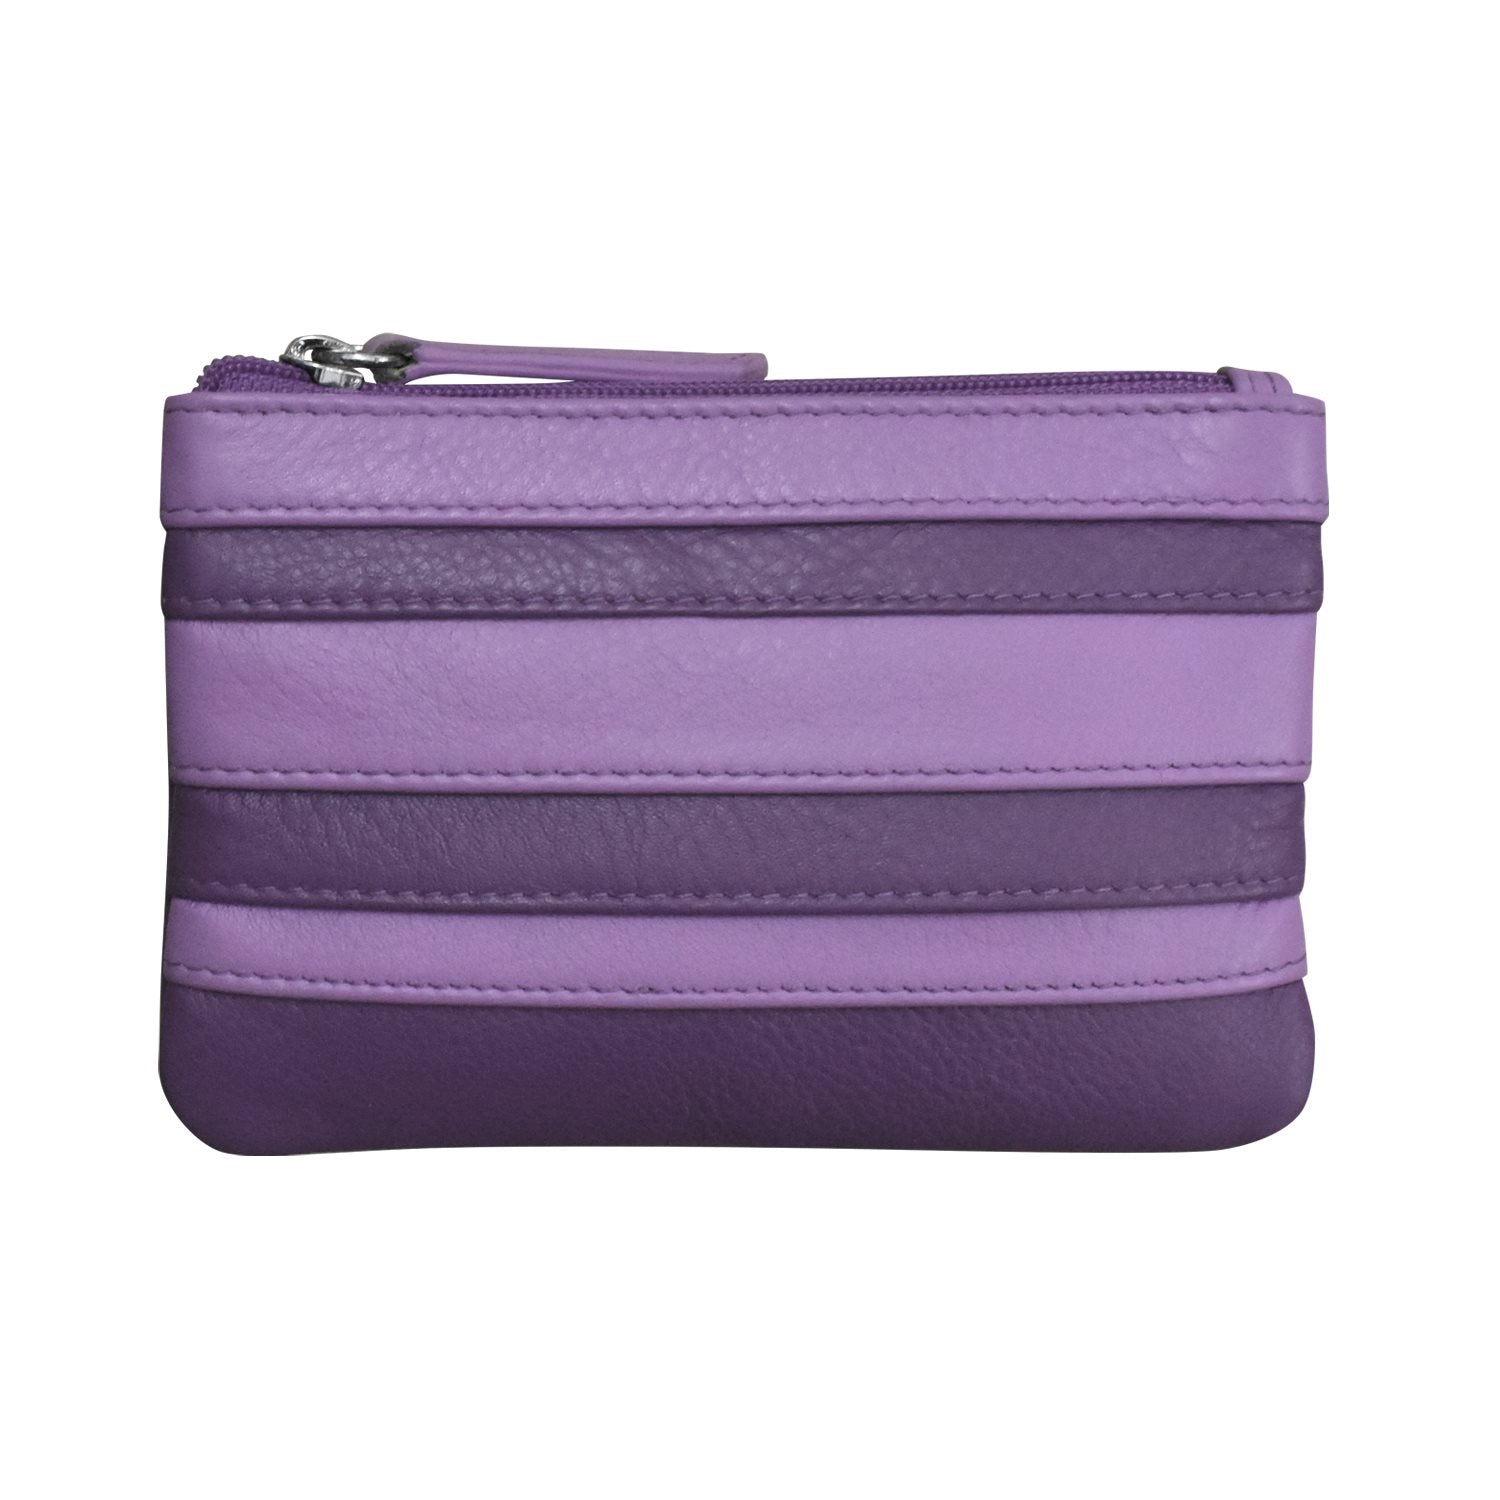 Striped Leather Coin Purse Planet Purple